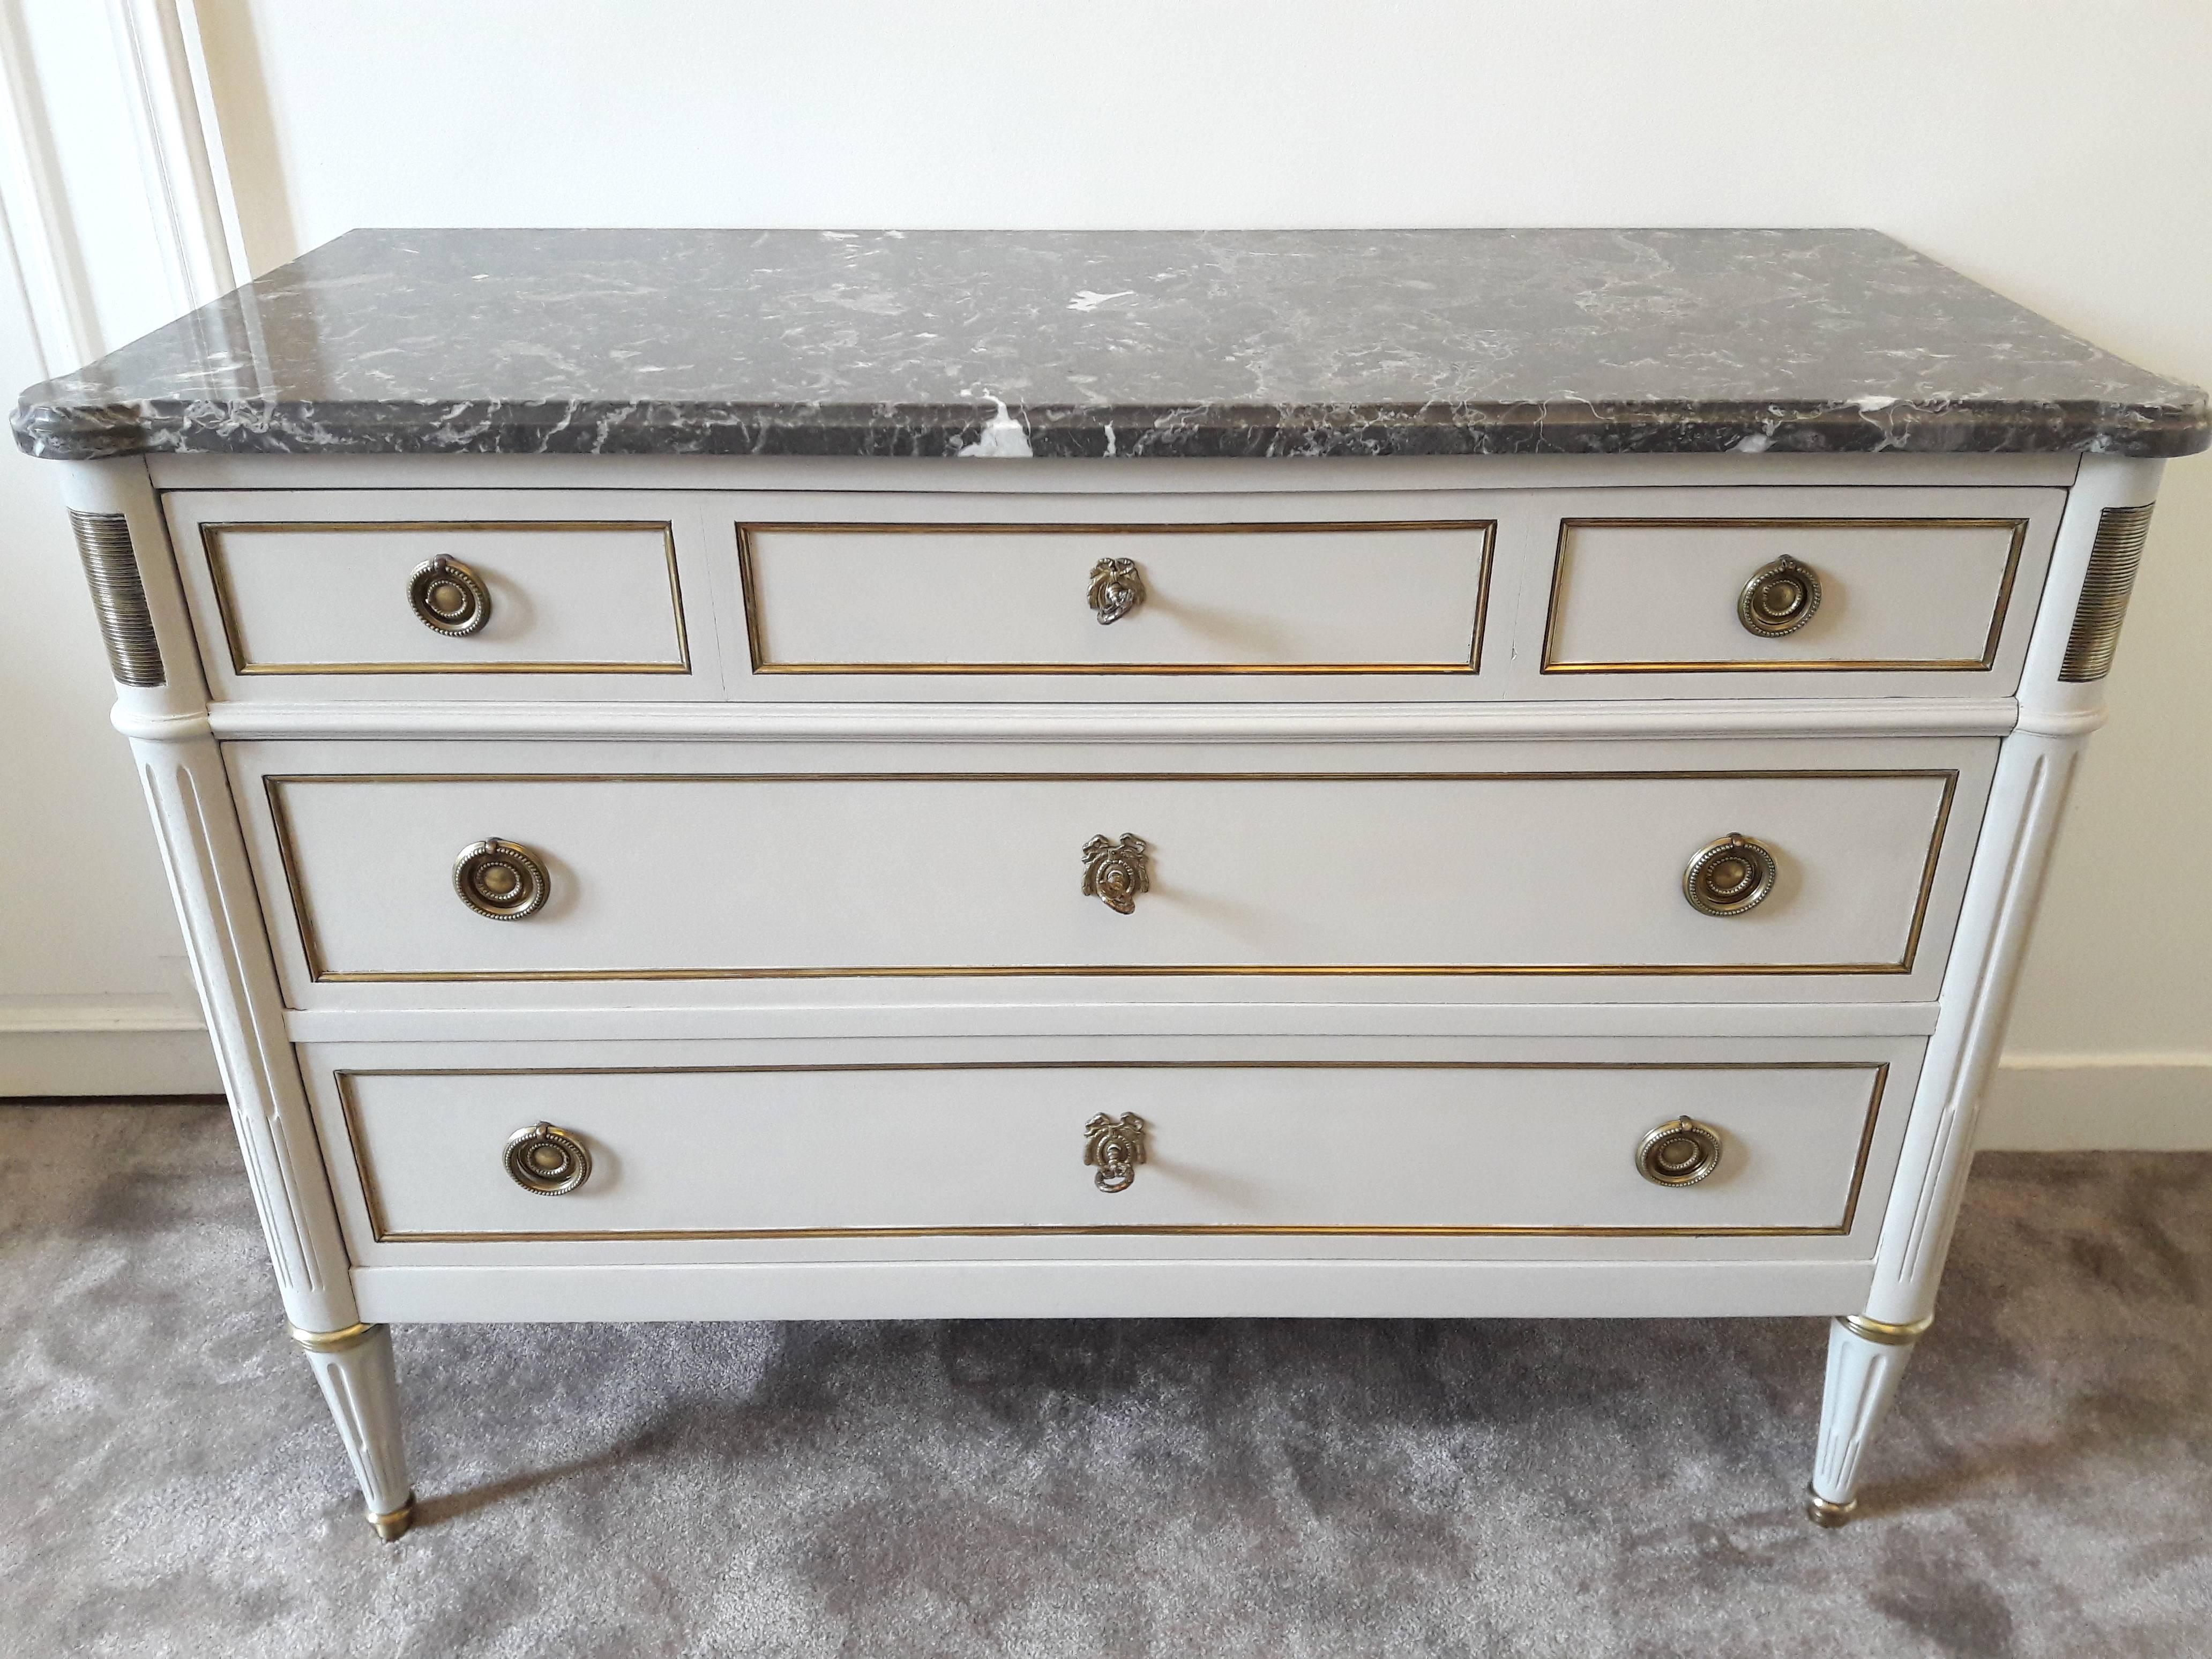 Antique French Louis XVI style chest of drawers topped with a lustrous grey marble, fluted legs finished with golden bronze clogs. Three dovetailed drawers with brass details. 
The first drawer is drawn as if there were three, the woodworking and